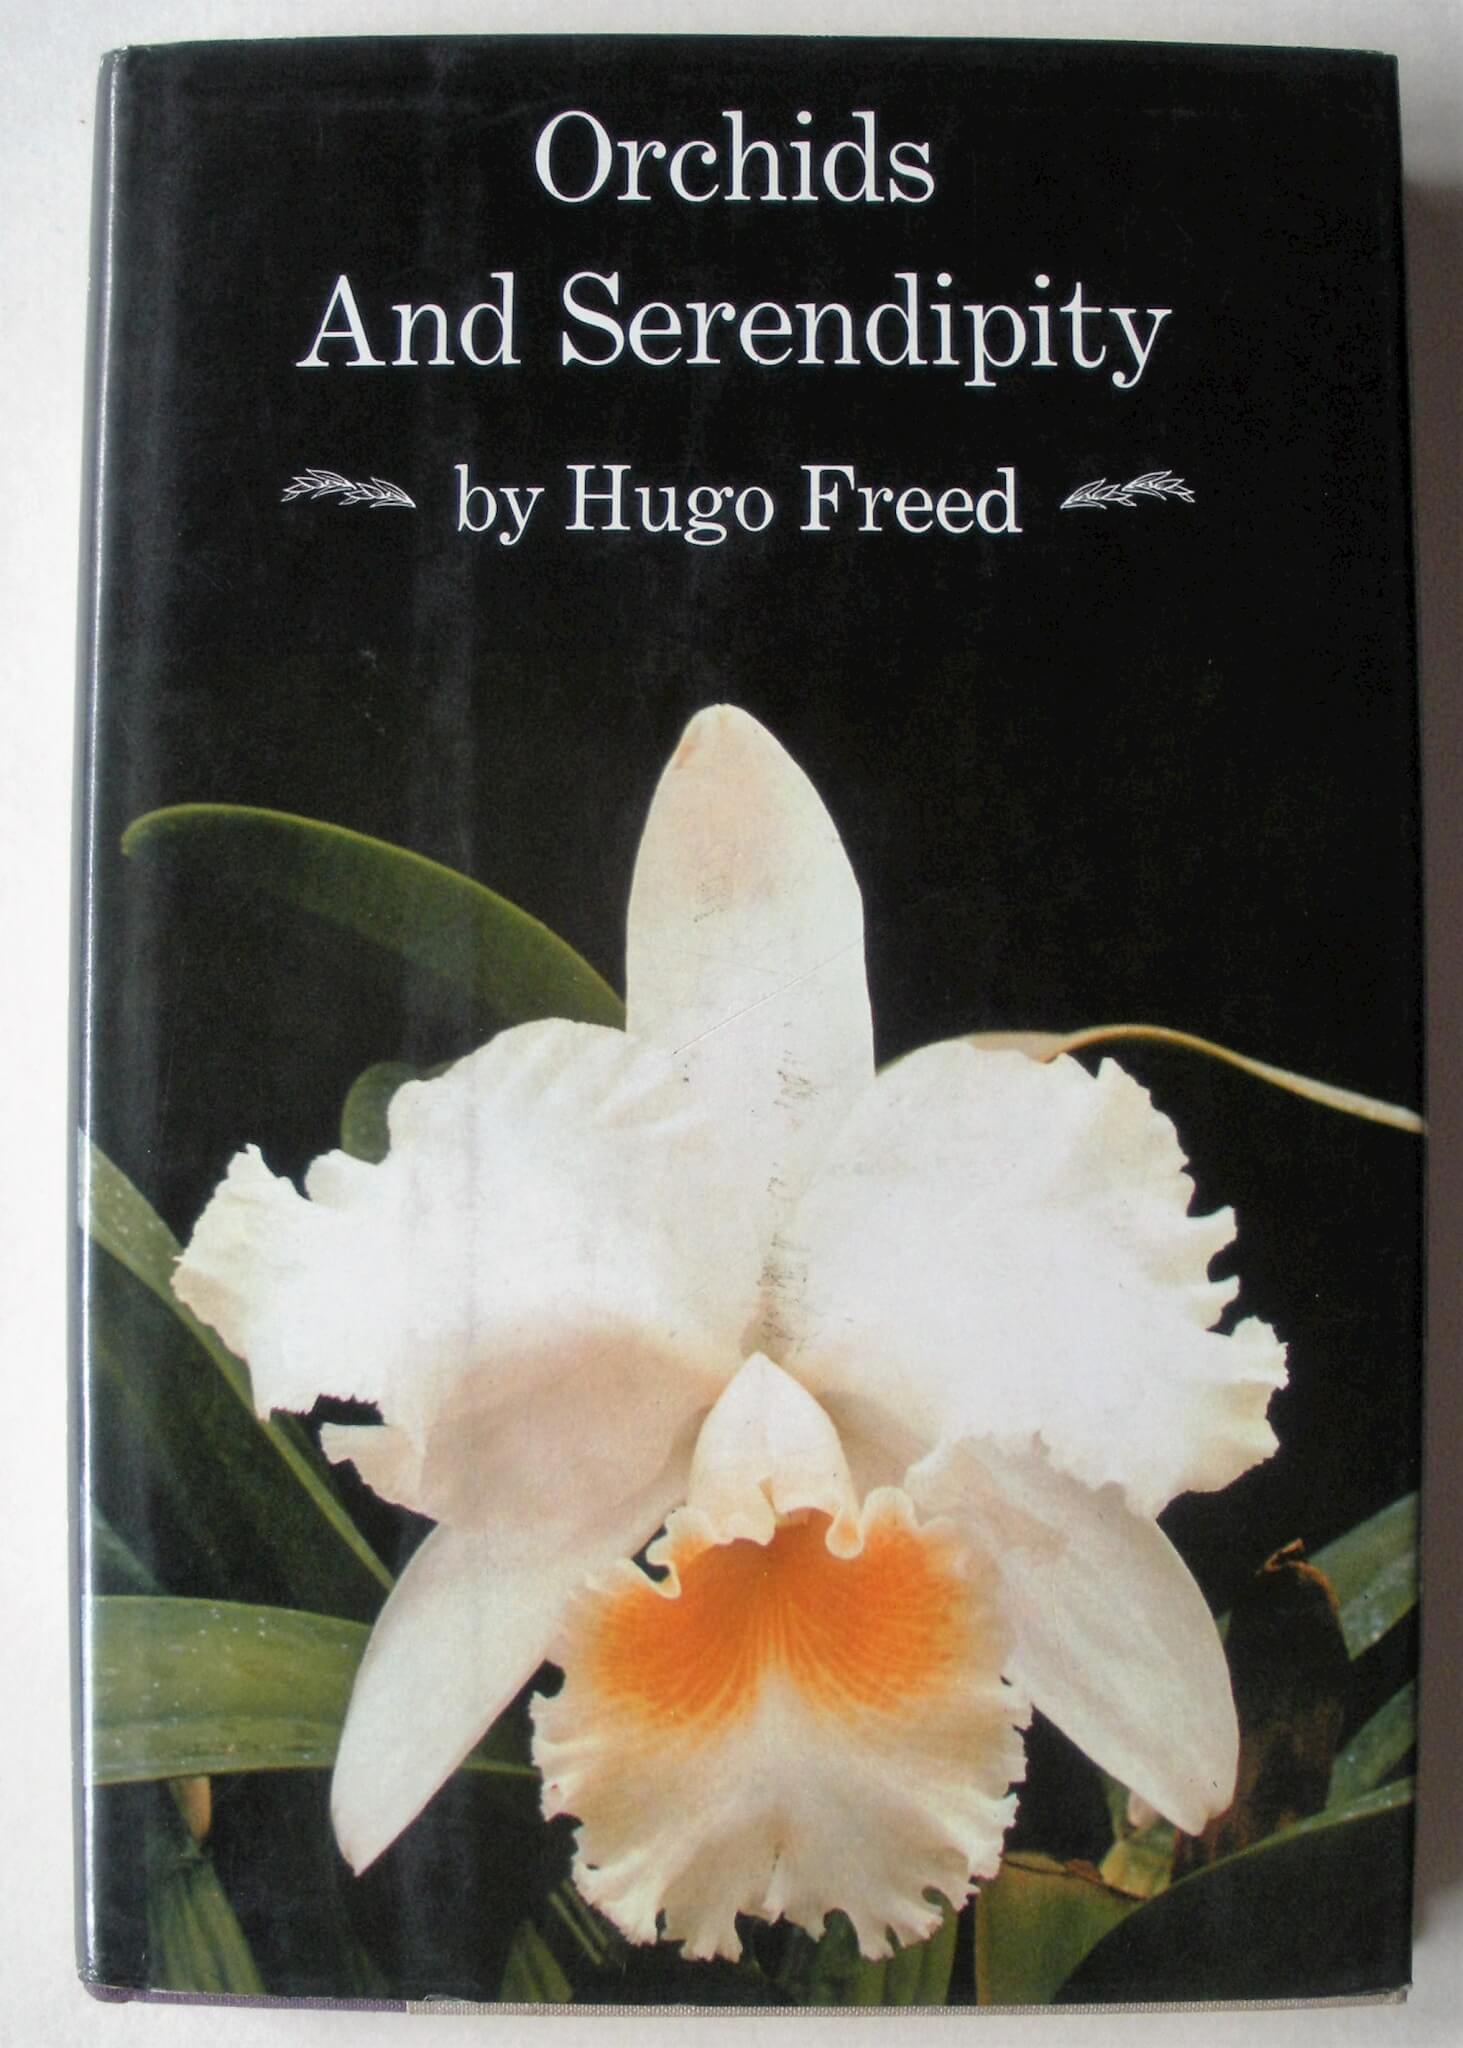 Orchids and Serendipity by Hugo Freed. 1970. - Orchid Exchange